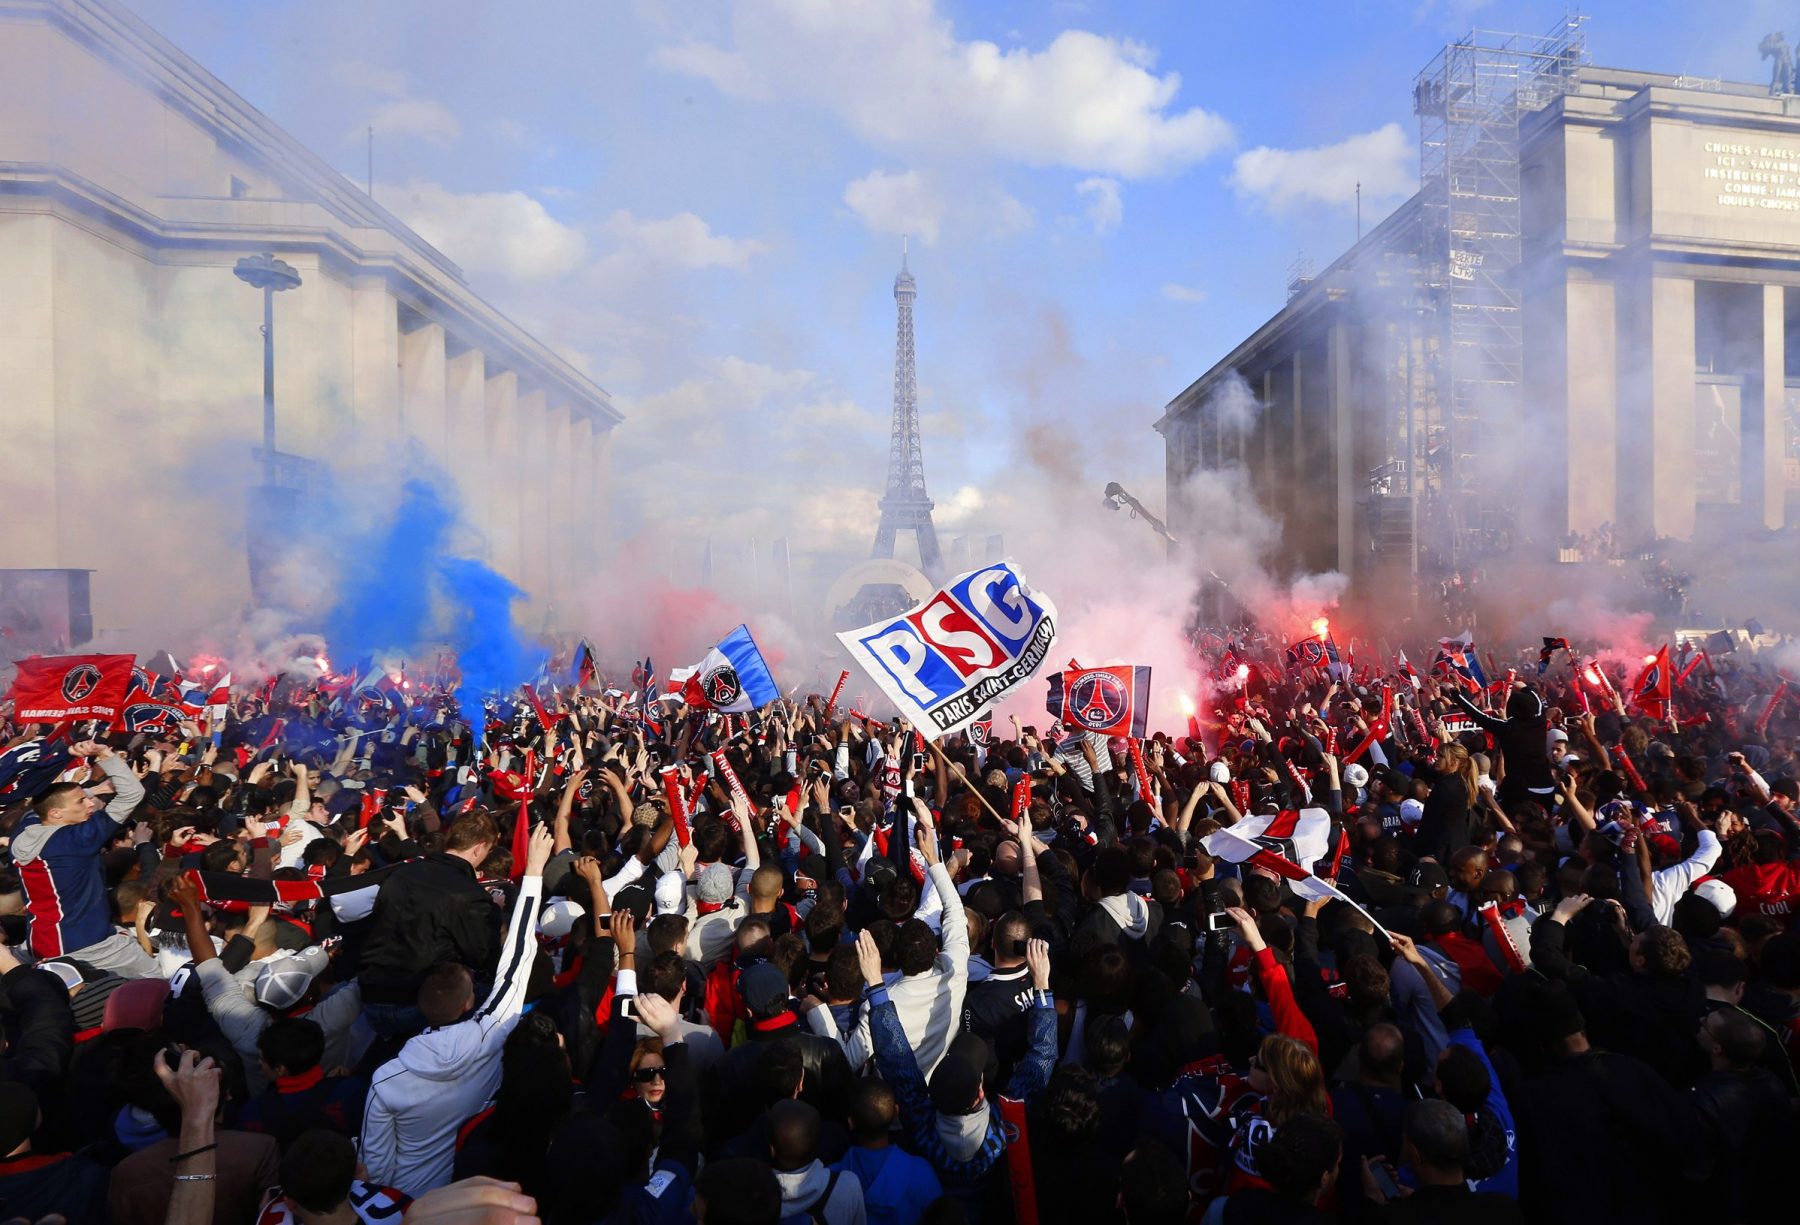 THE LAST OF THE ULTRAS PARIS SAINTGERMAIN AND THE REPRESSION OF